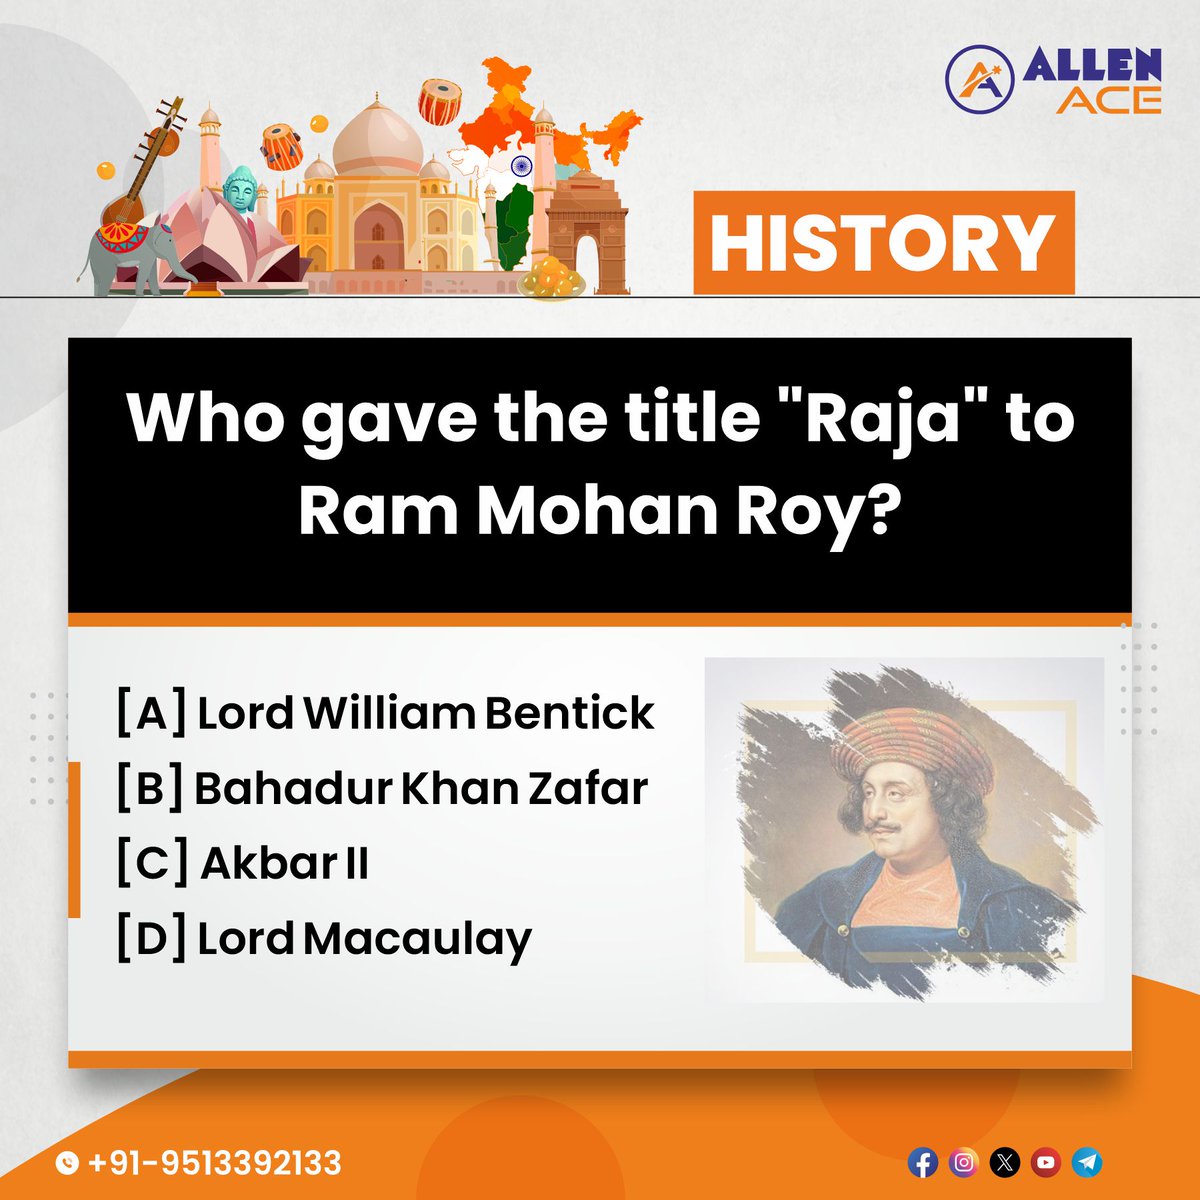 👉 Targeting RAS, Do let us know how much you are aware of History.

⏱ Take the Quiz and check your Knowledge.

#RASPreparation #History #HistoryofIndia #ALLENACE #Jaipur #indianhistory #historical #medieval #worldhistory
#worldwar #indianhistoryandculture #ras #upsc #ips